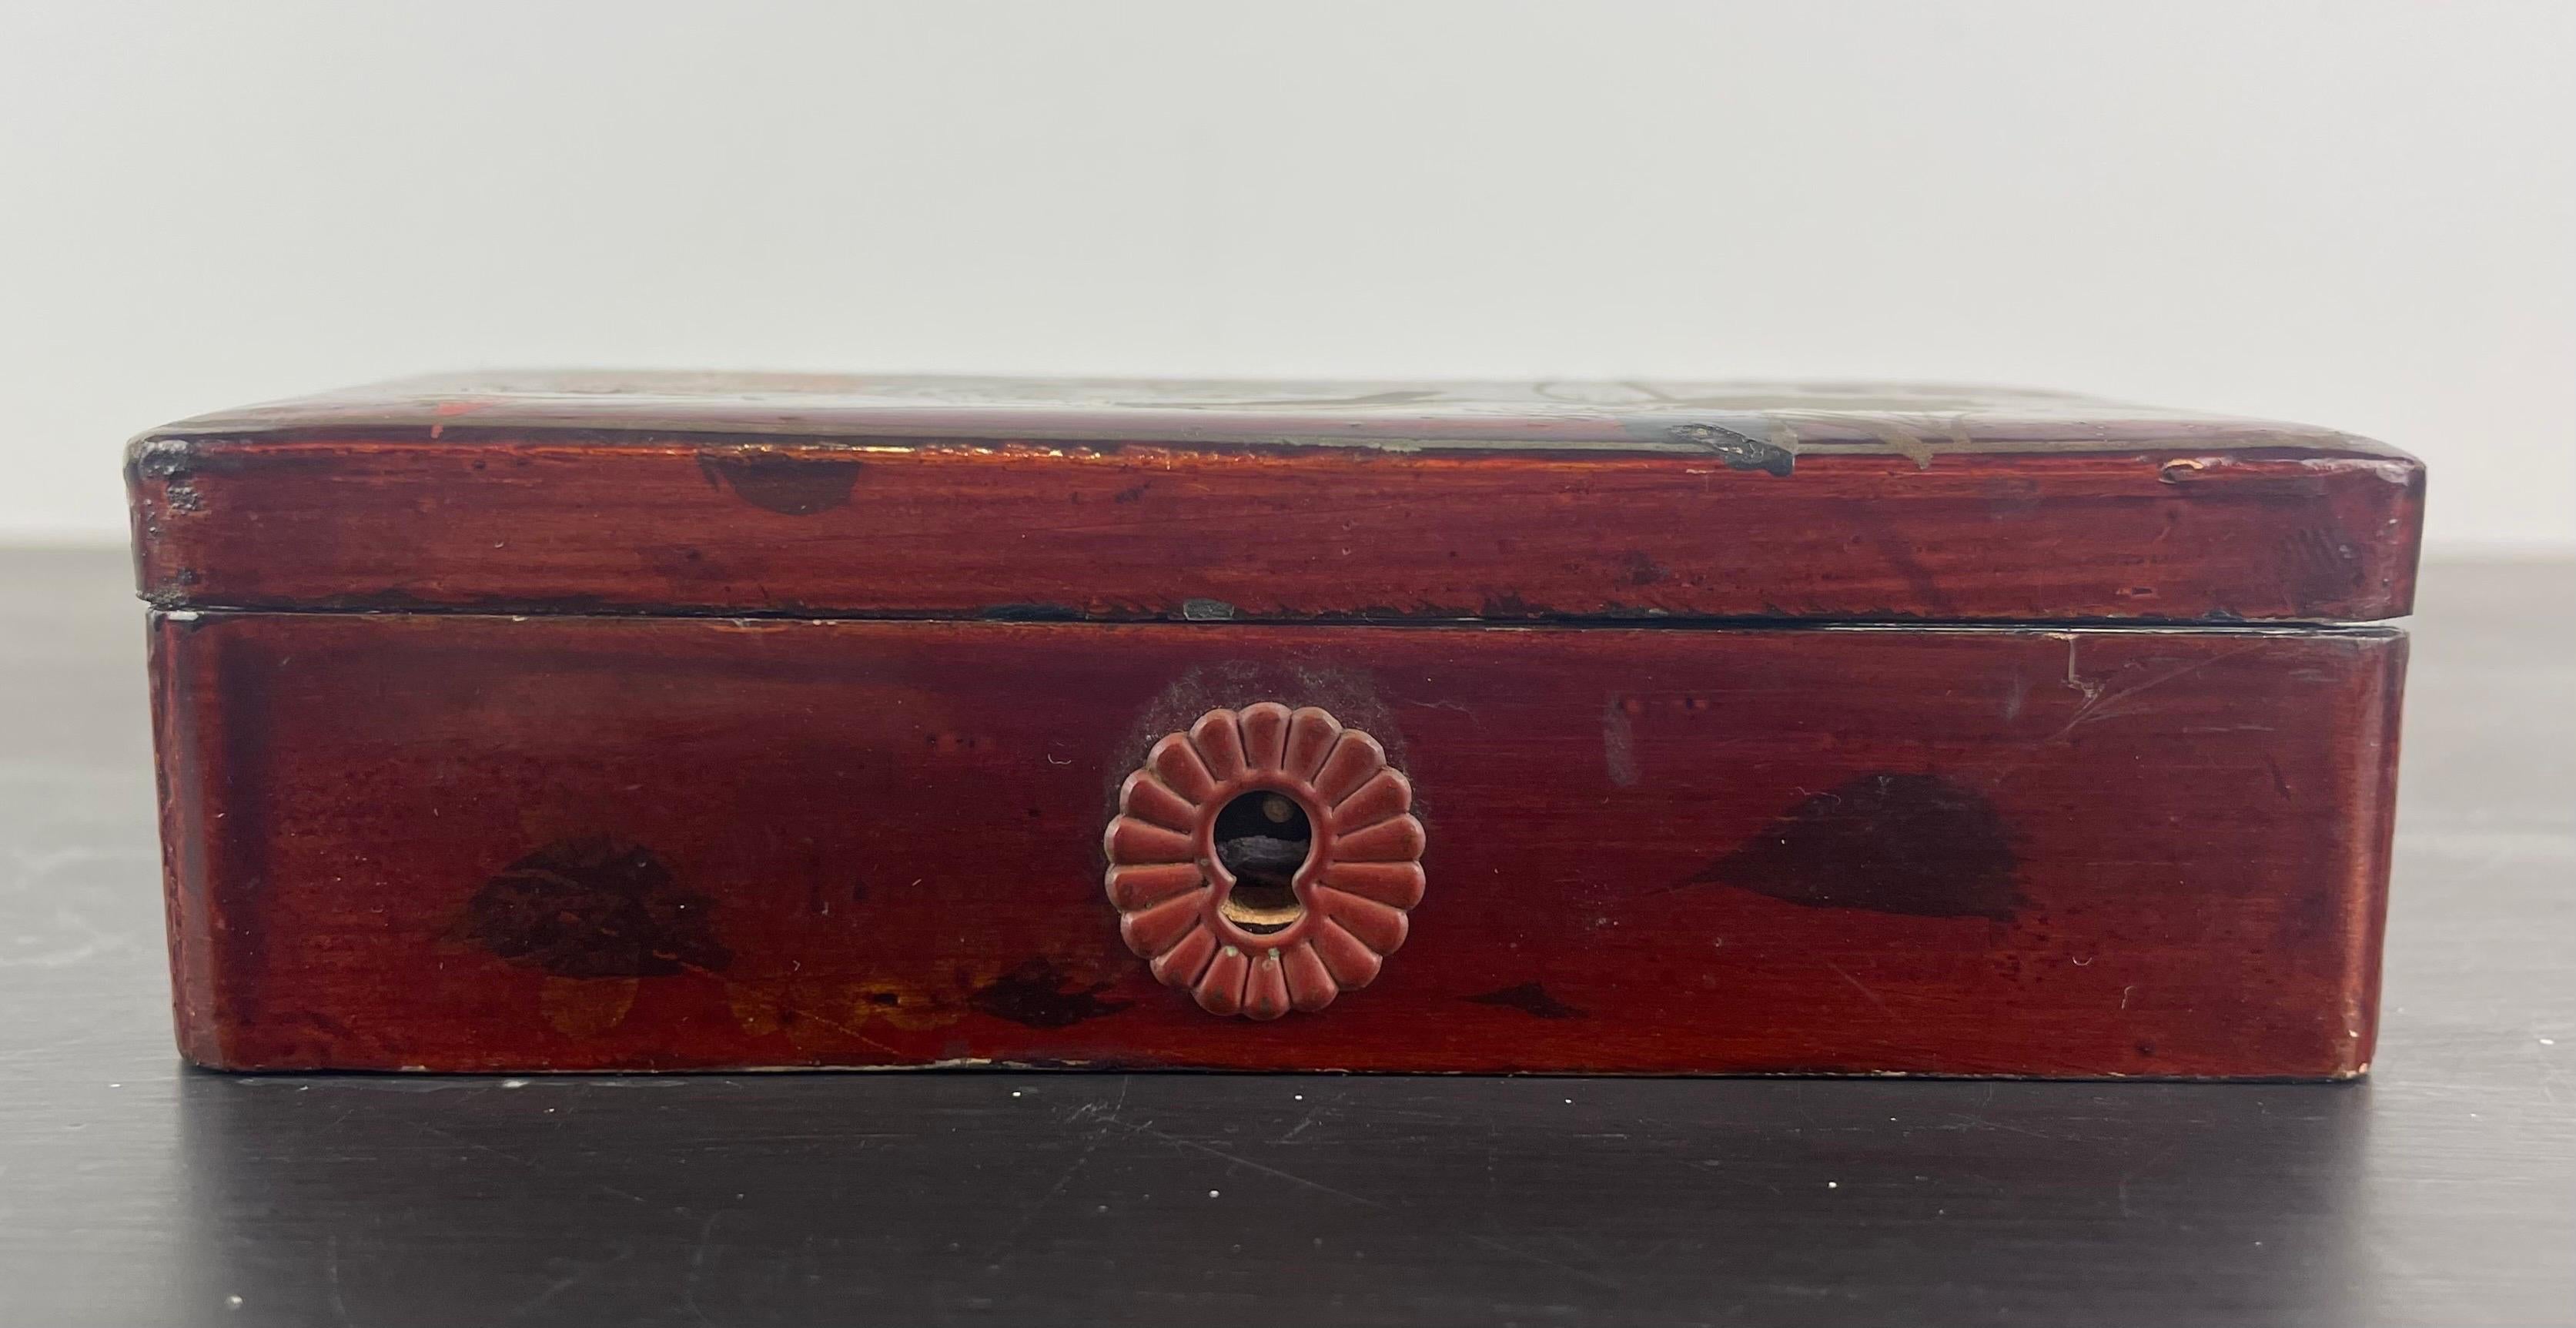 Pretty Japanese lacquered box decorated with birds and foliage.
signed 
Lacquered inside and outside
Late 19th century
Without key
Nice lock
Ideal for storing jewelry.